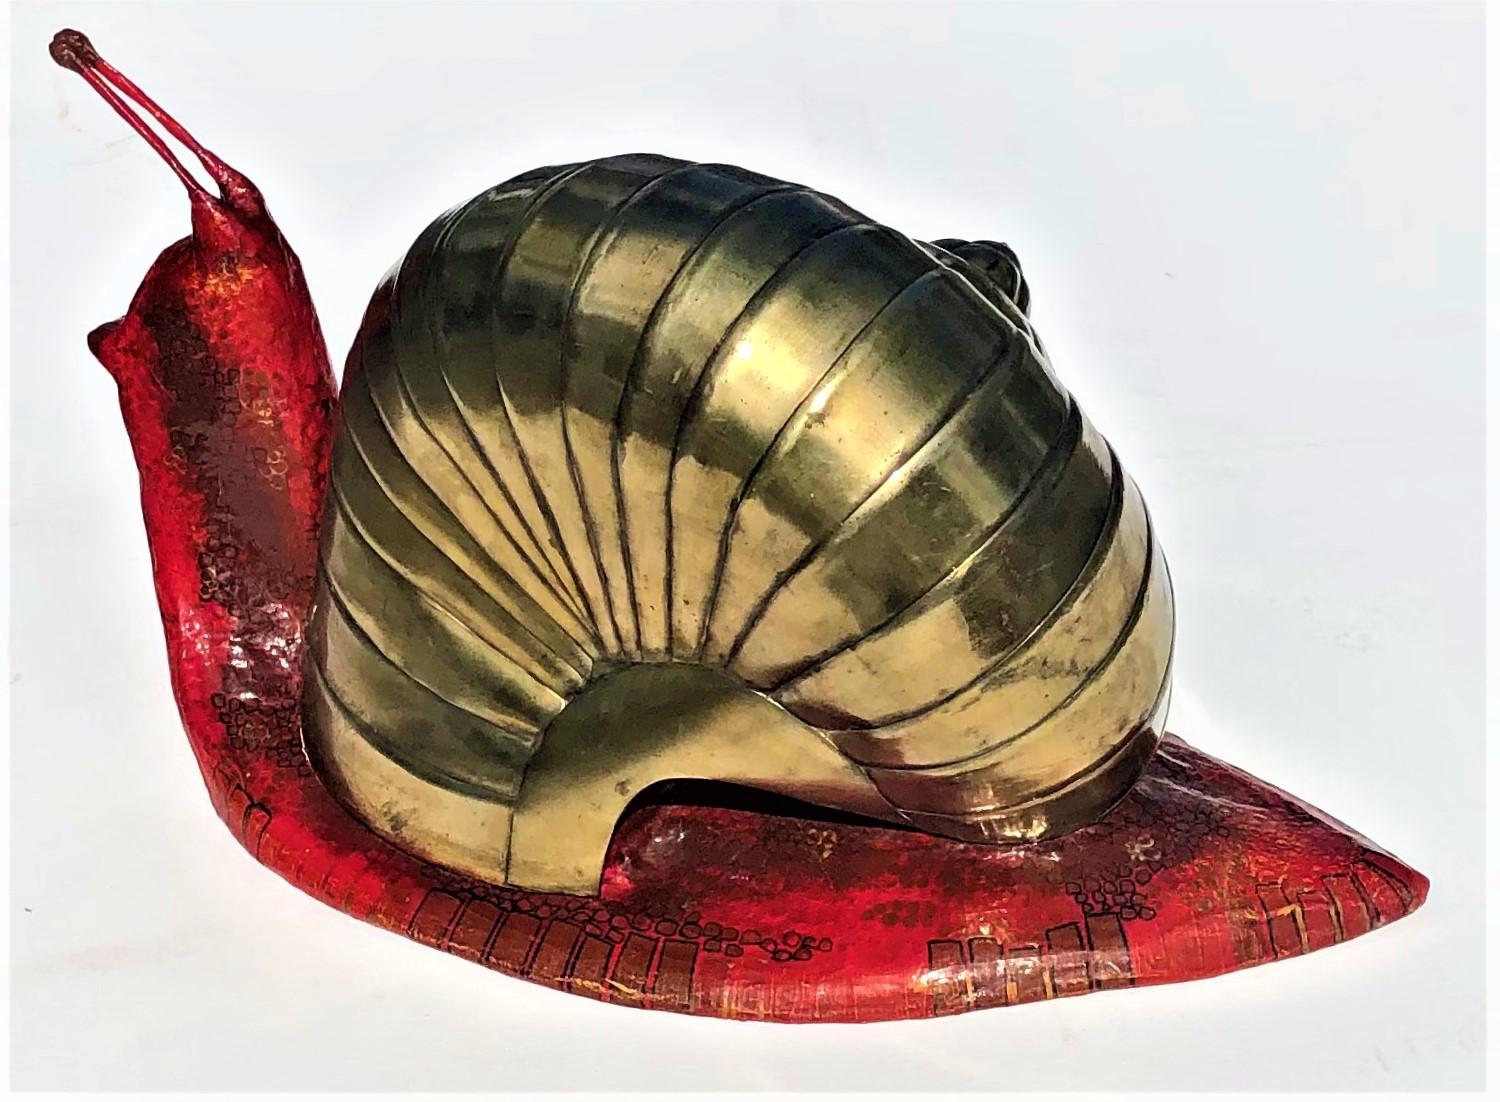 Organic Modern Sergio Bustamante Mexican Snail Sculpture Signed 26/100, Hand Painted